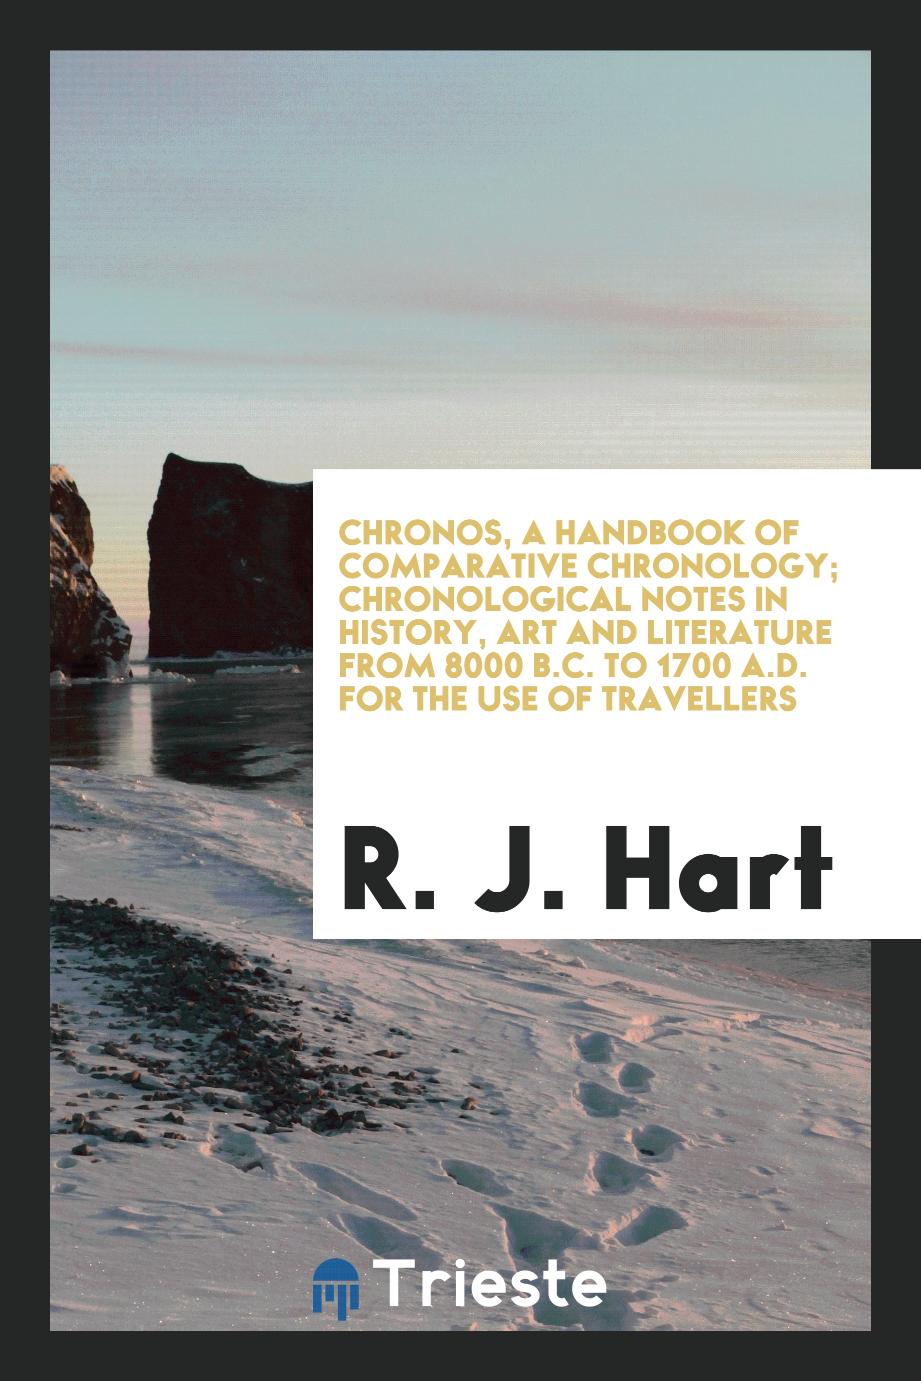 Chronos, a Handbook of Comparative Chronology; Chronological Notes in History, Art and Literature from 8000 B.C. To 1700 A.D. For the Use of Travellers